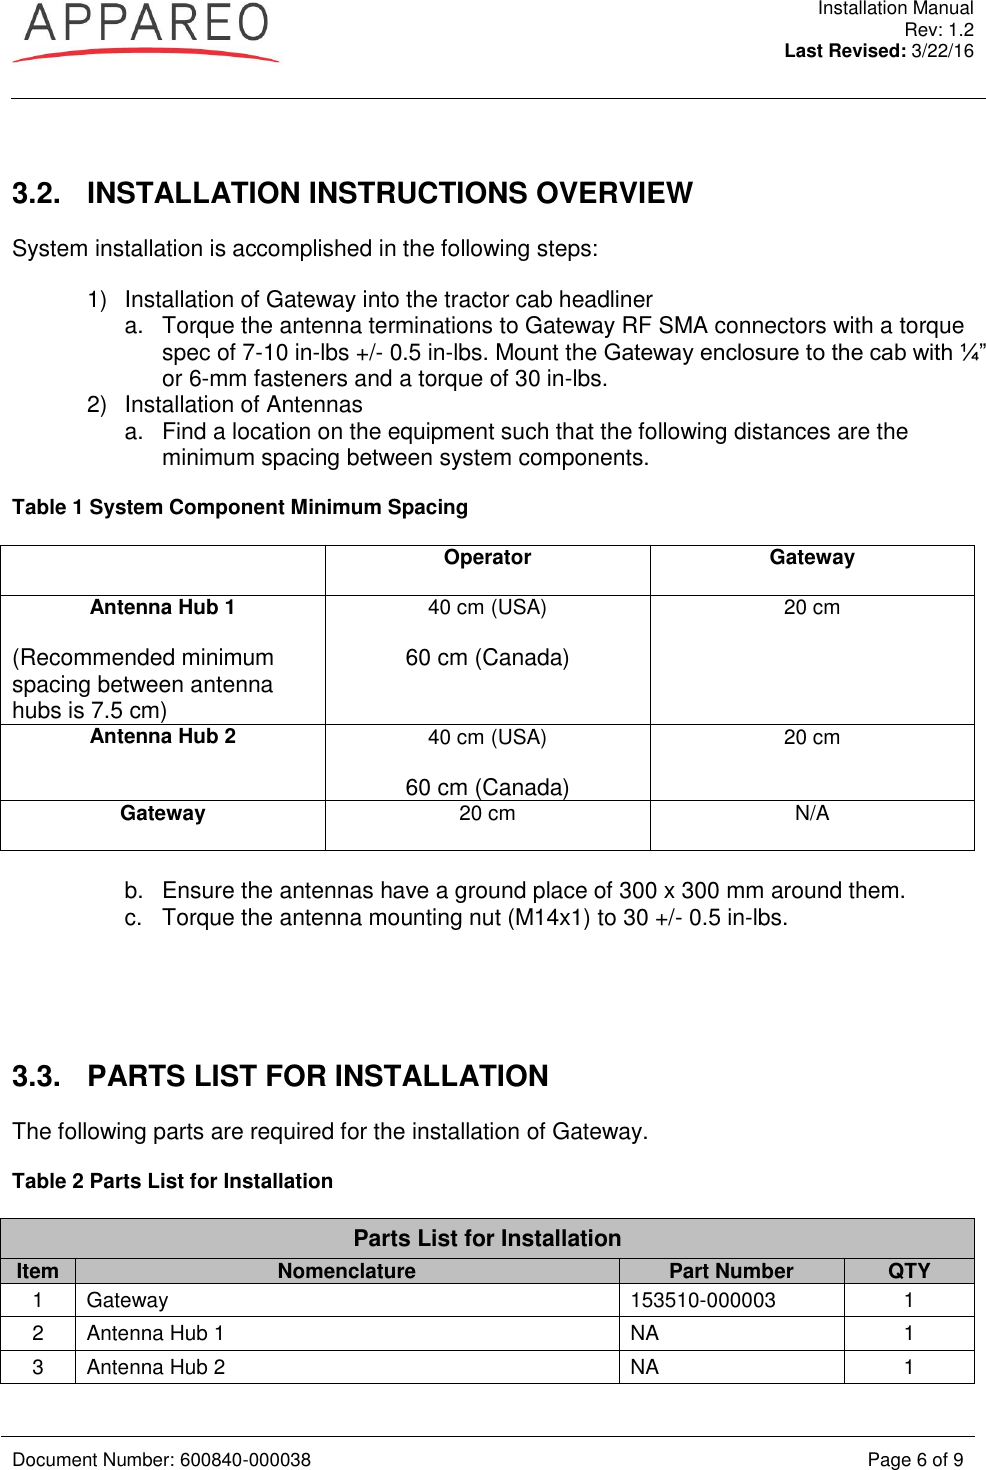  Installation Manual Rev: 1.2 Last Revised: 3/22/16   Document Number: 600840-000038 Page 6 of 9   3.2.  INSTALLATION INSTRUCTIONS OVERVIEW System installation is accomplished in the following steps: 1)  Installation of Gateway into the tractor cab headliner a.  Torque the antenna terminations to Gateway RF SMA connectors with a torque spec of 7-10 in-lbs +/- 0.5 in-lbs. Mount the Gateway enclosure to the cab with ¼” or 6-mm fasteners and a torque of 30 in-lbs. 2)  Installation of Antennas a.  Find a location on the equipment such that the following distances are the minimum spacing between system components. Table 1 System Component Minimum Spacing  Operator  Gateway Antenna Hub 1  (Recommended minimum spacing between antenna hubs is 7.5 cm) 40 cm (USA) 60 cm (Canada) 20 cm Antenna Hub 2 40 cm (USA) 60 cm (Canada) 20 cm Gateway 20 cm N/A  b.  Ensure the antennas have a ground place of 300 x 300 mm around them. c.  Torque the antenna mounting nut (M14x1) to 30 +/- 0.5 in-lbs.     3.3.  PARTS LIST FOR INSTALLATION The following parts are required for the installation of Gateway. Table 2 Parts List for Installation Parts List for Installation Item Nomenclature Part Number QTY 1 Gateway 153510-000003 1 2 Antenna Hub 1 NA 1 3 Antenna Hub 2 NA 1 